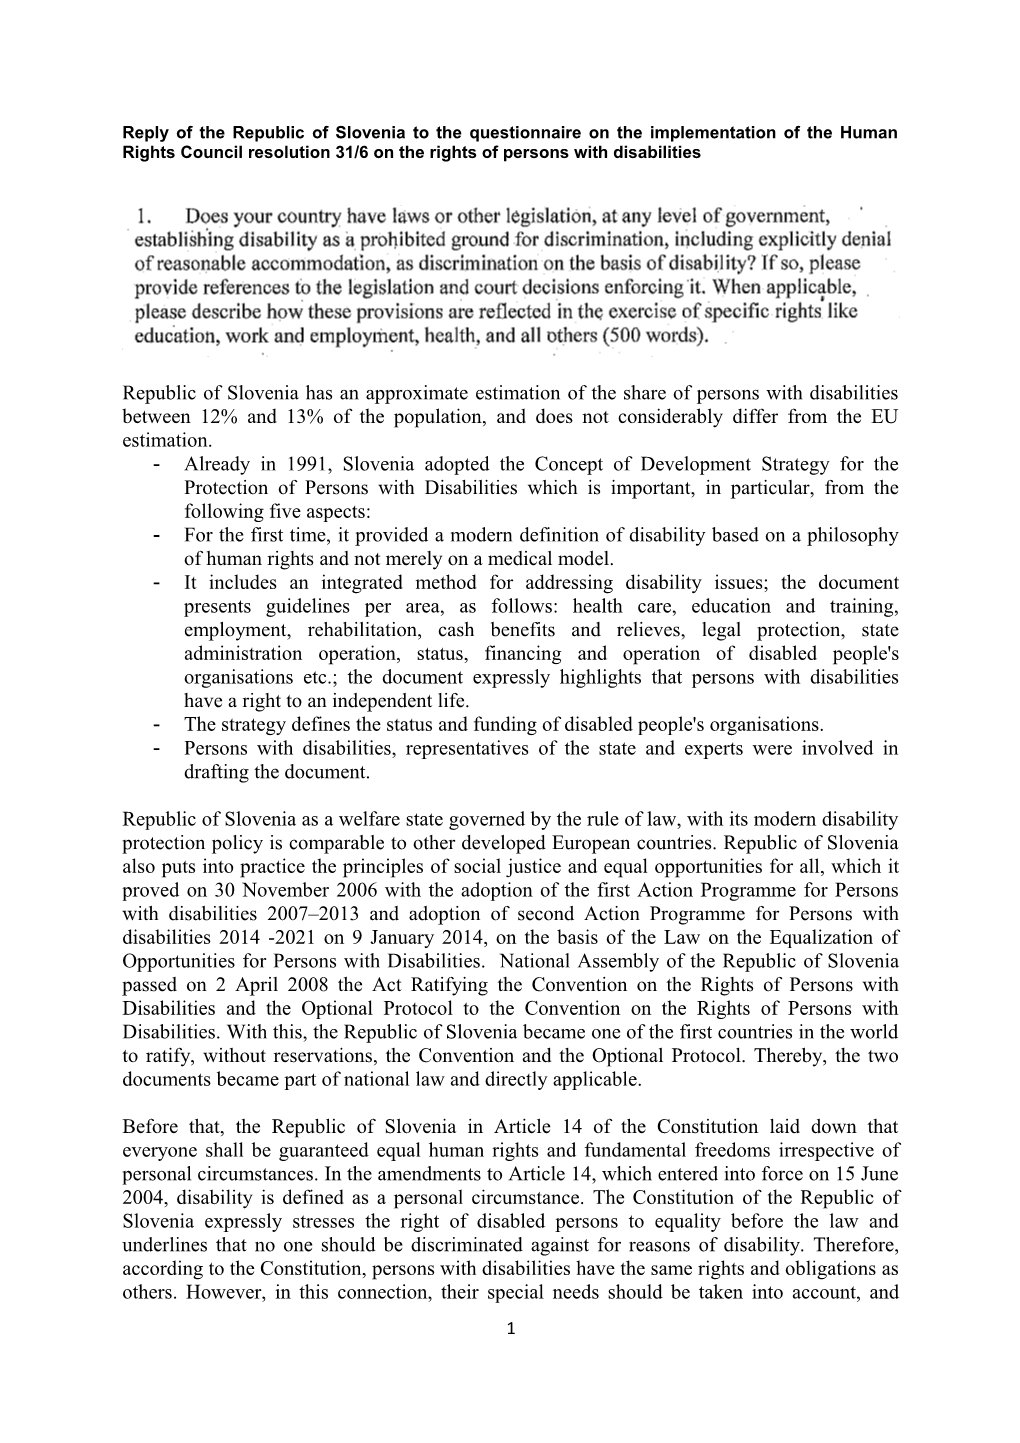 Reply of the Republic of Slovenia to the Questionnaire on the Implementation of the Human